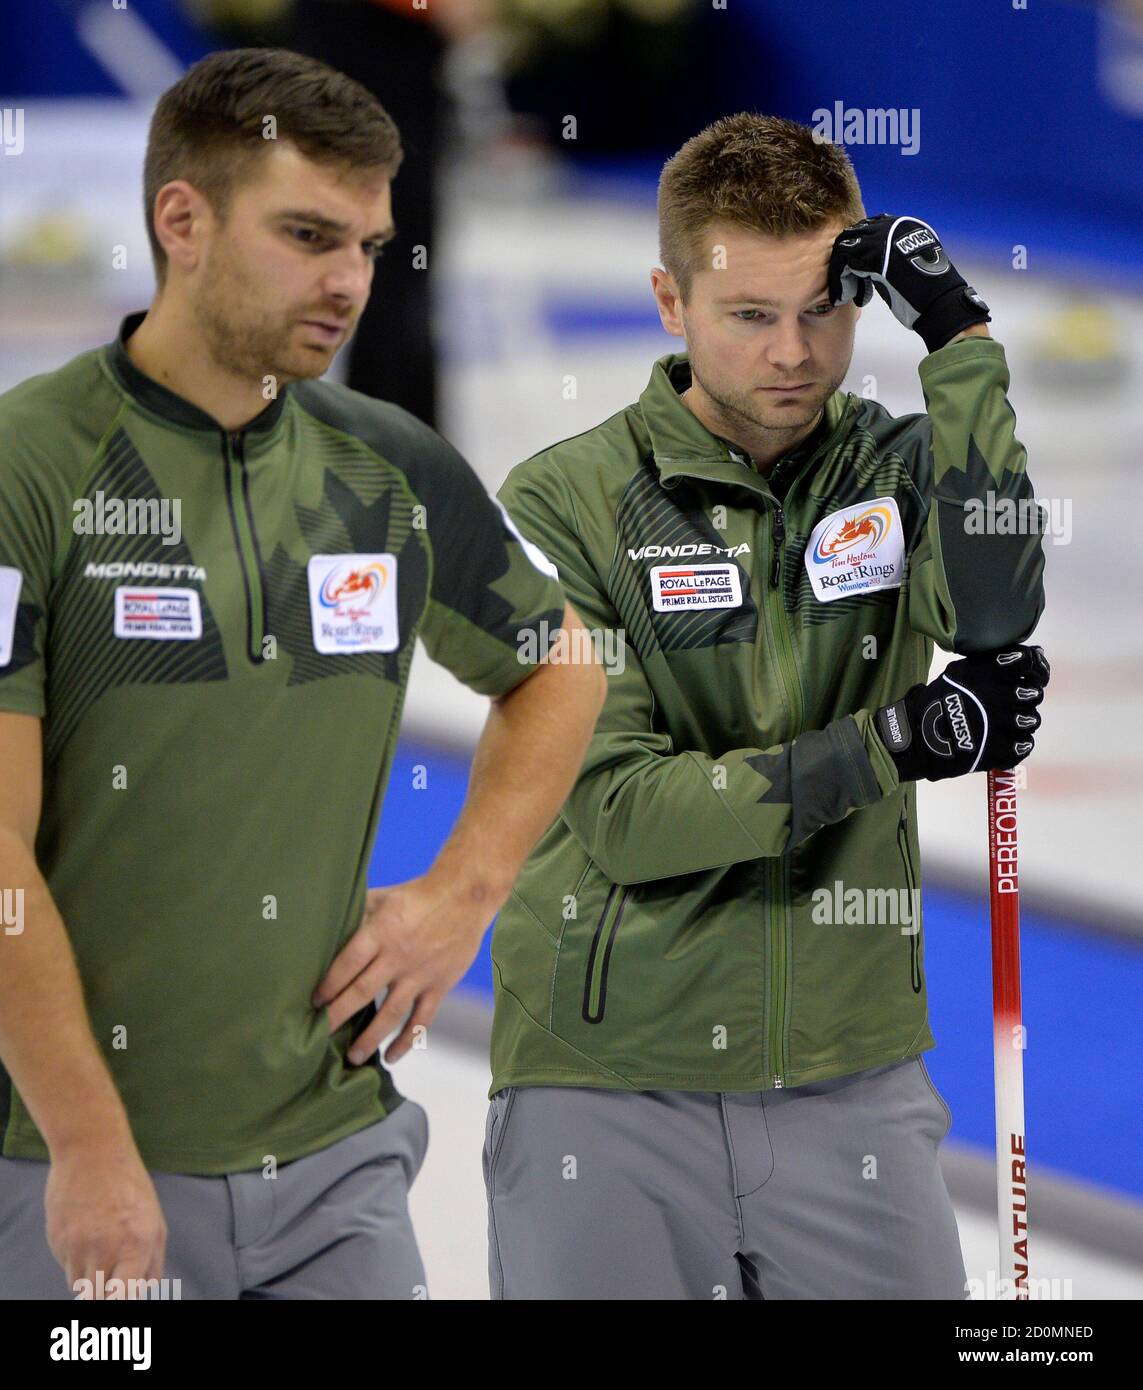 Skip Mike McEwen (R) and second Matt Wozniak look over their next shot  against Team Koe during draw 14 at the Roar of the Rings Canadian Olympic  Curling Trials in Winnipeg, December